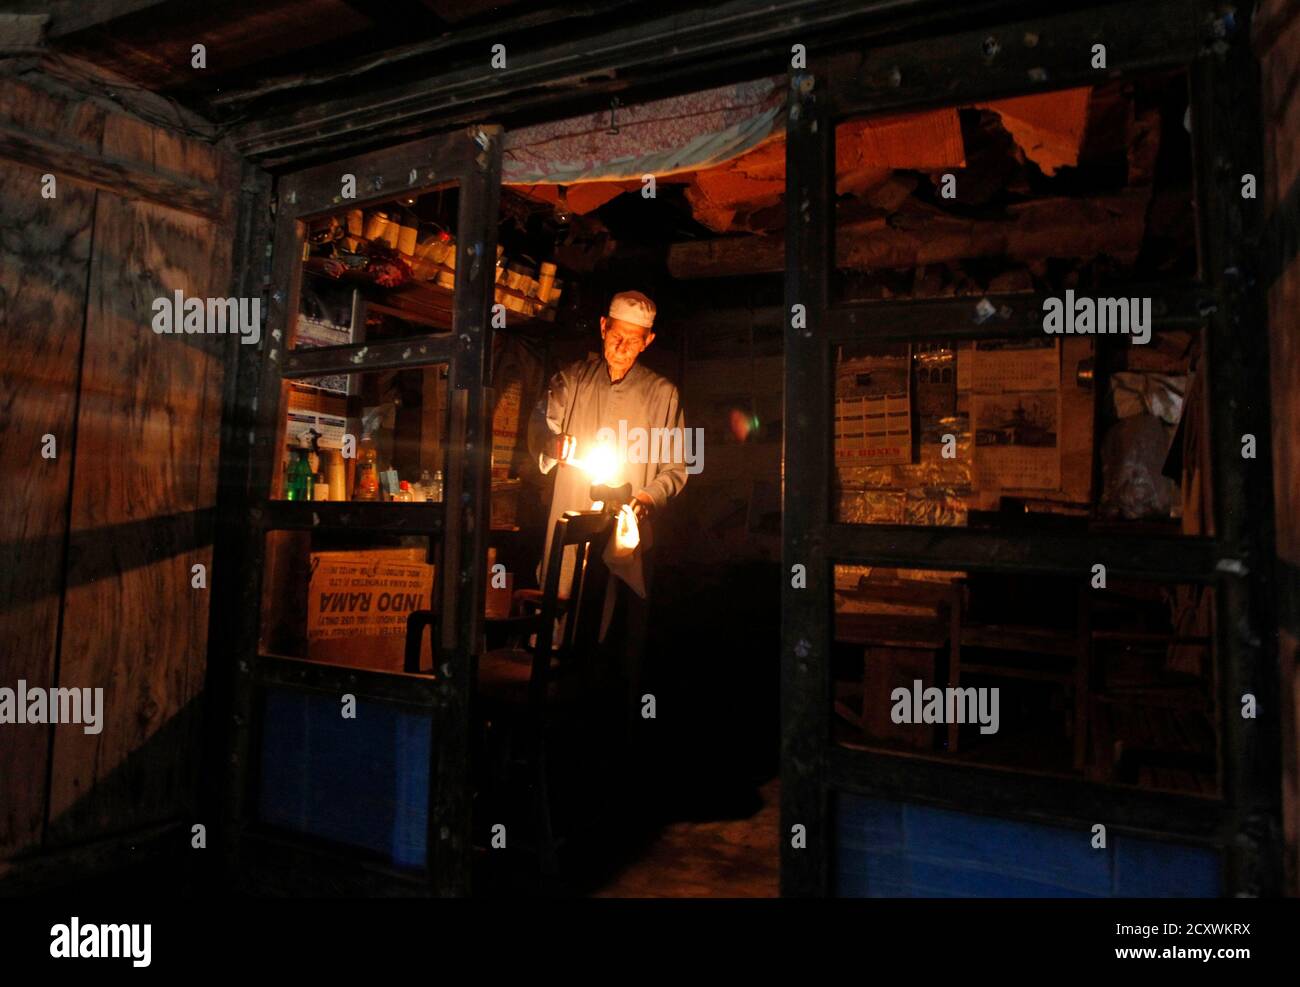 A barber lights candles after a power-cut due to curtailment, at his shop in Srinagar July 3, 2013. India is betting a gas price hike will boost supply and help fix the country's chronic power shortages, but the plan may falter unless the debt-laden industry can pass on higher energy costs to consumers or win government subsidies. Picture taken July 3, 2013. To match story INDIA-POWER/ REUTERS/Danish Ismail (INDIAN-ADMINISTERD KASHMIR - Tags: ENERGY BUSINESS) Stock Photo